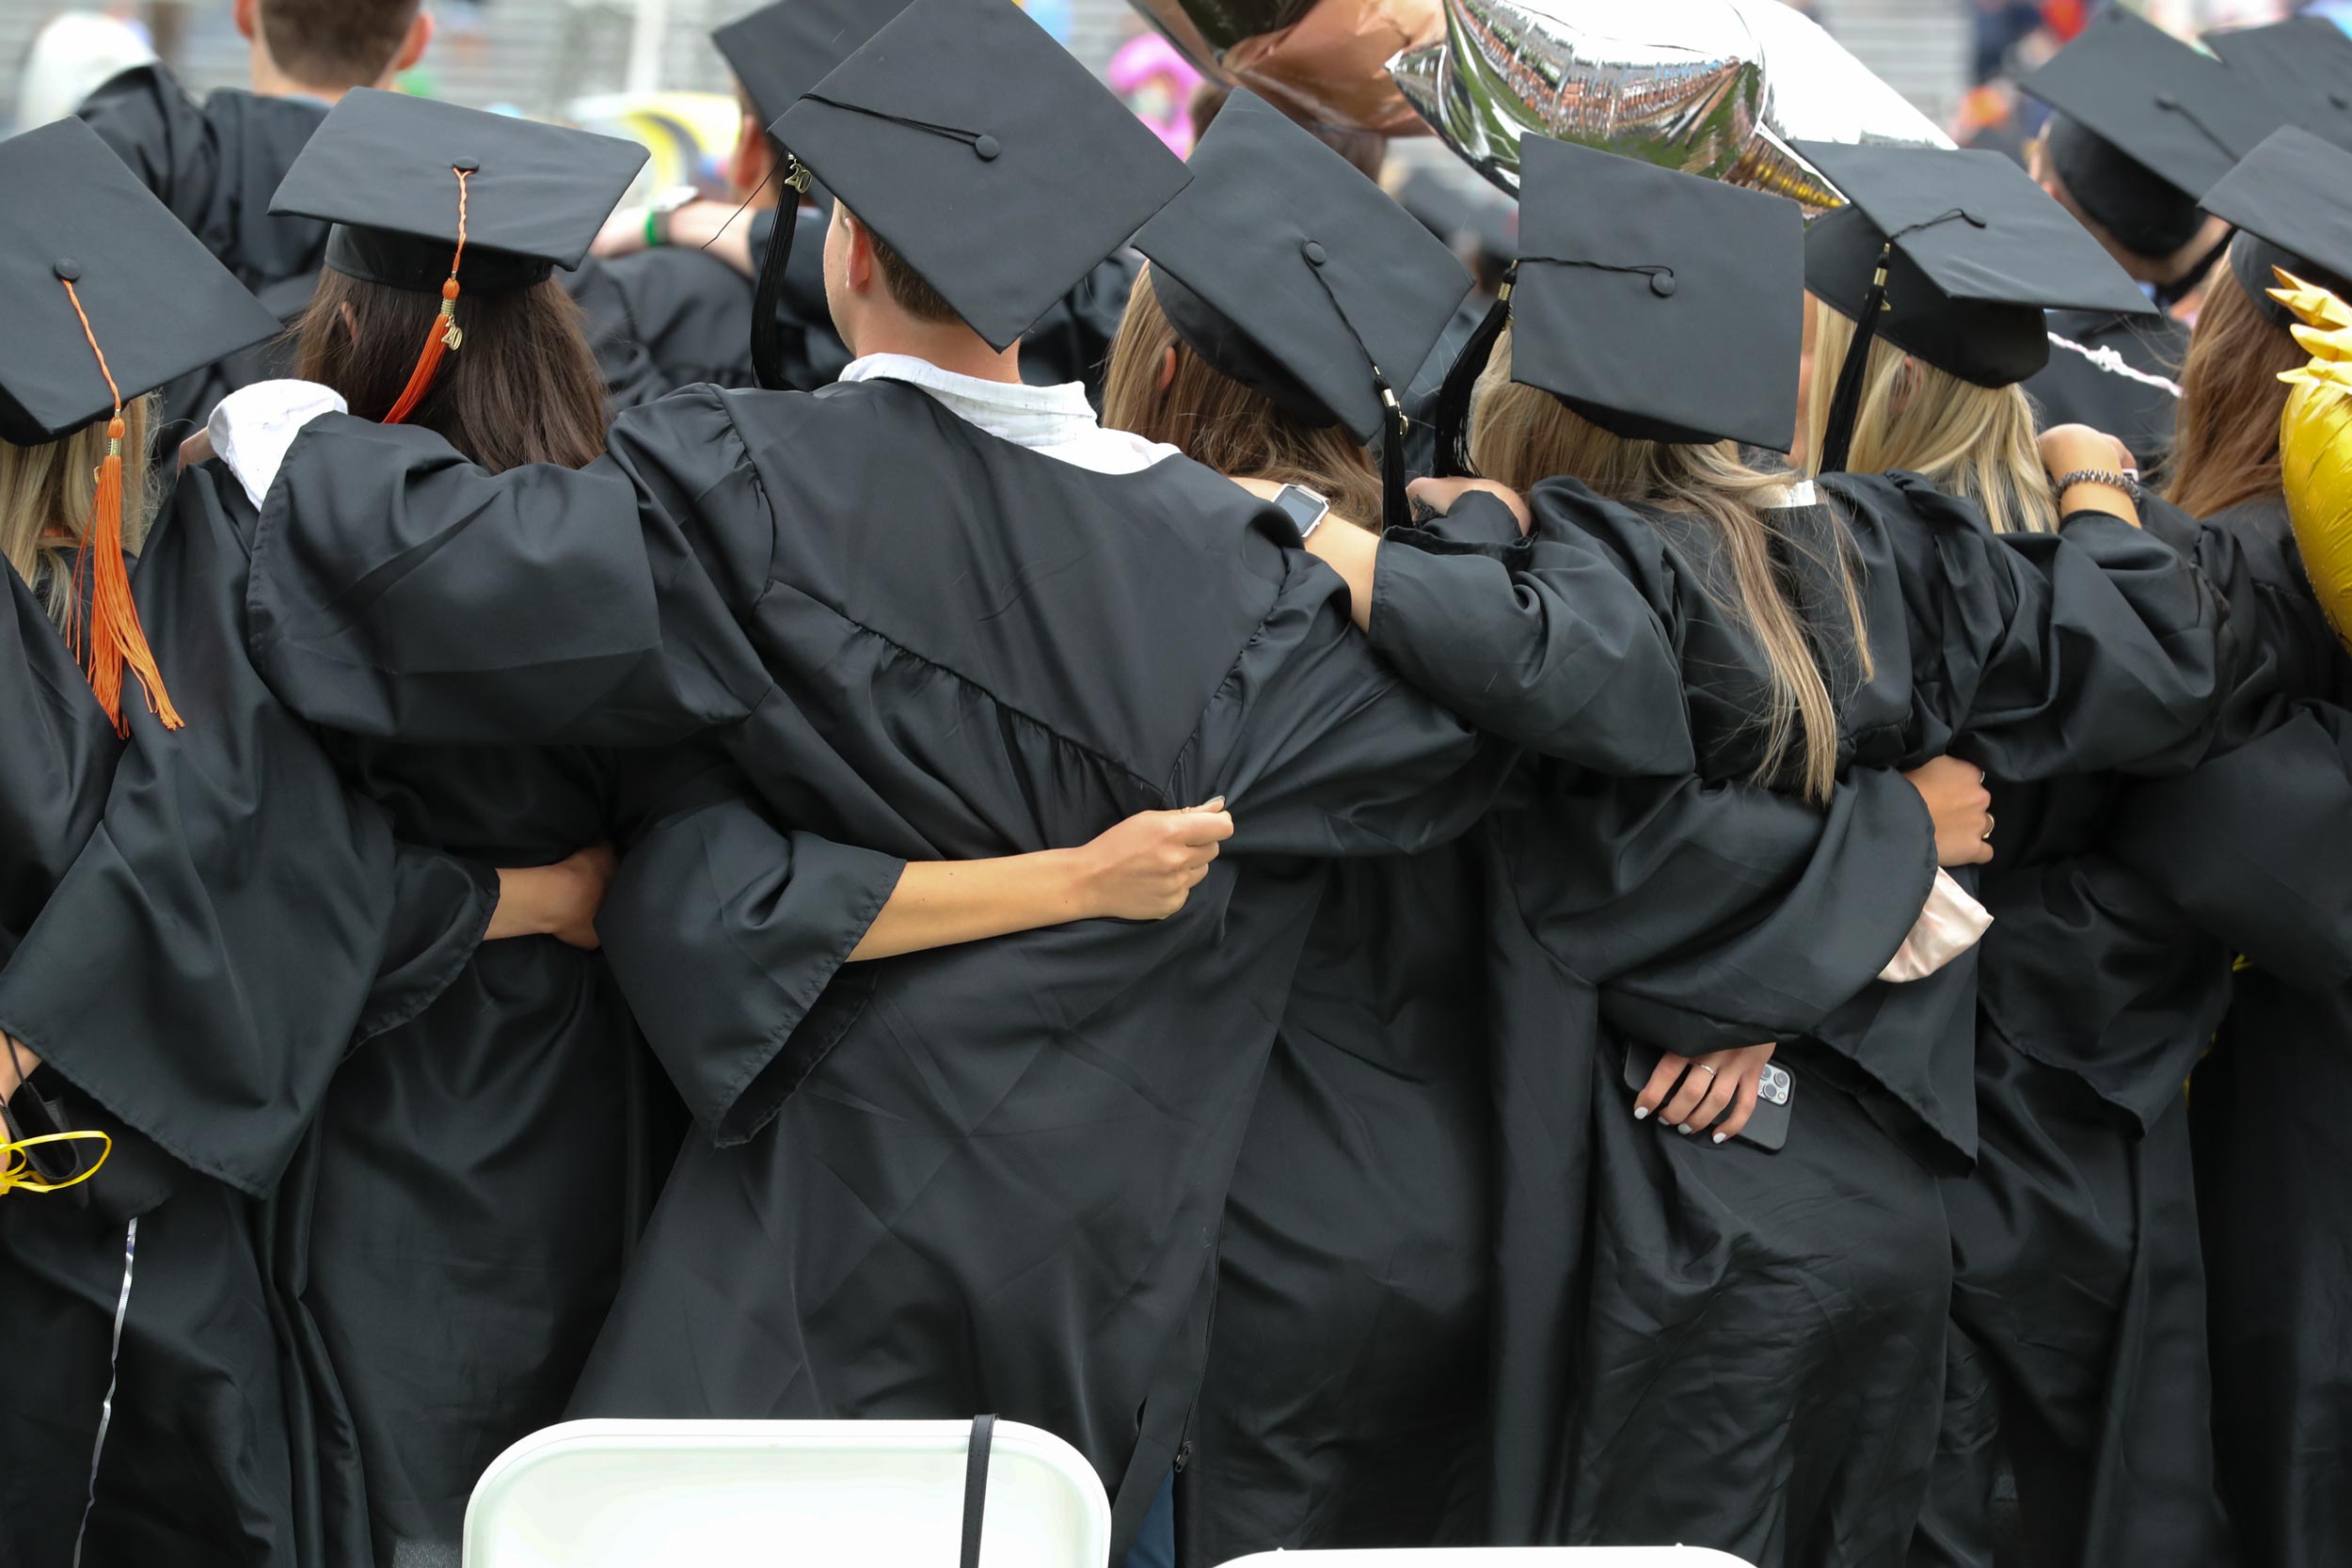 Graduates standing in a line while wrapping their arms around each other 